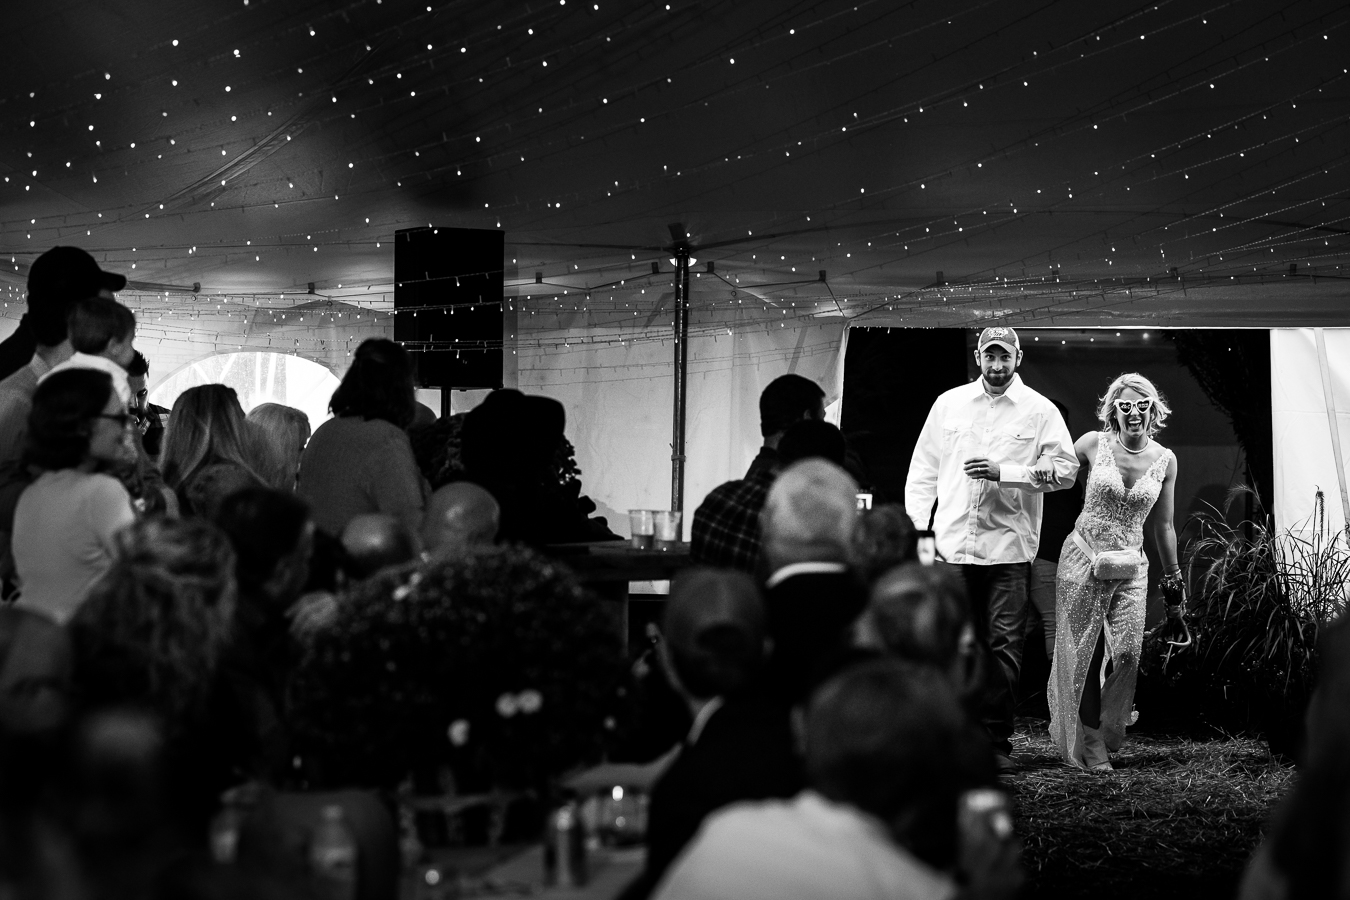 wild country wedding photographer, lisa rhinehart, captures this fun candid black and white image of the bride and groom as they enter their country inspired wedding reception wearing a white button down and fun white heart shaped glasses before they get the party started